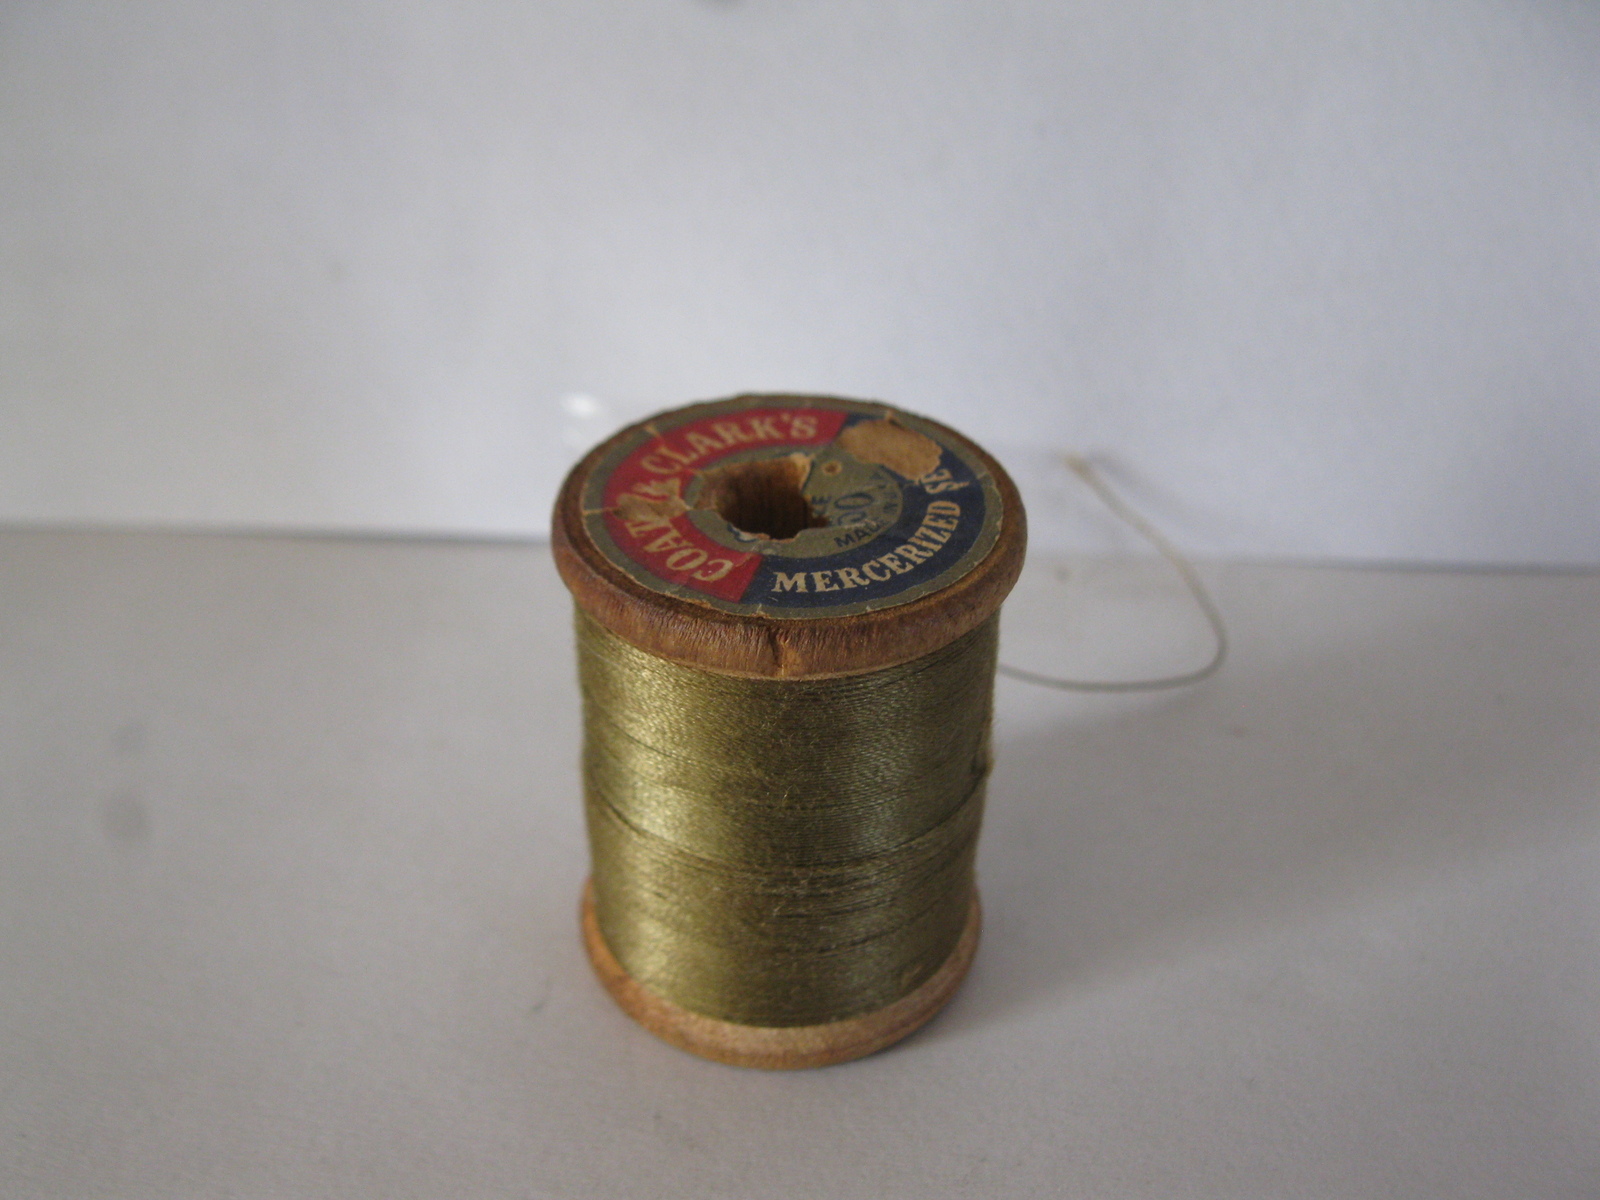 Primary image for #16 old wood Spool w/ Thread: Coat's & Clark #127 Boilfast